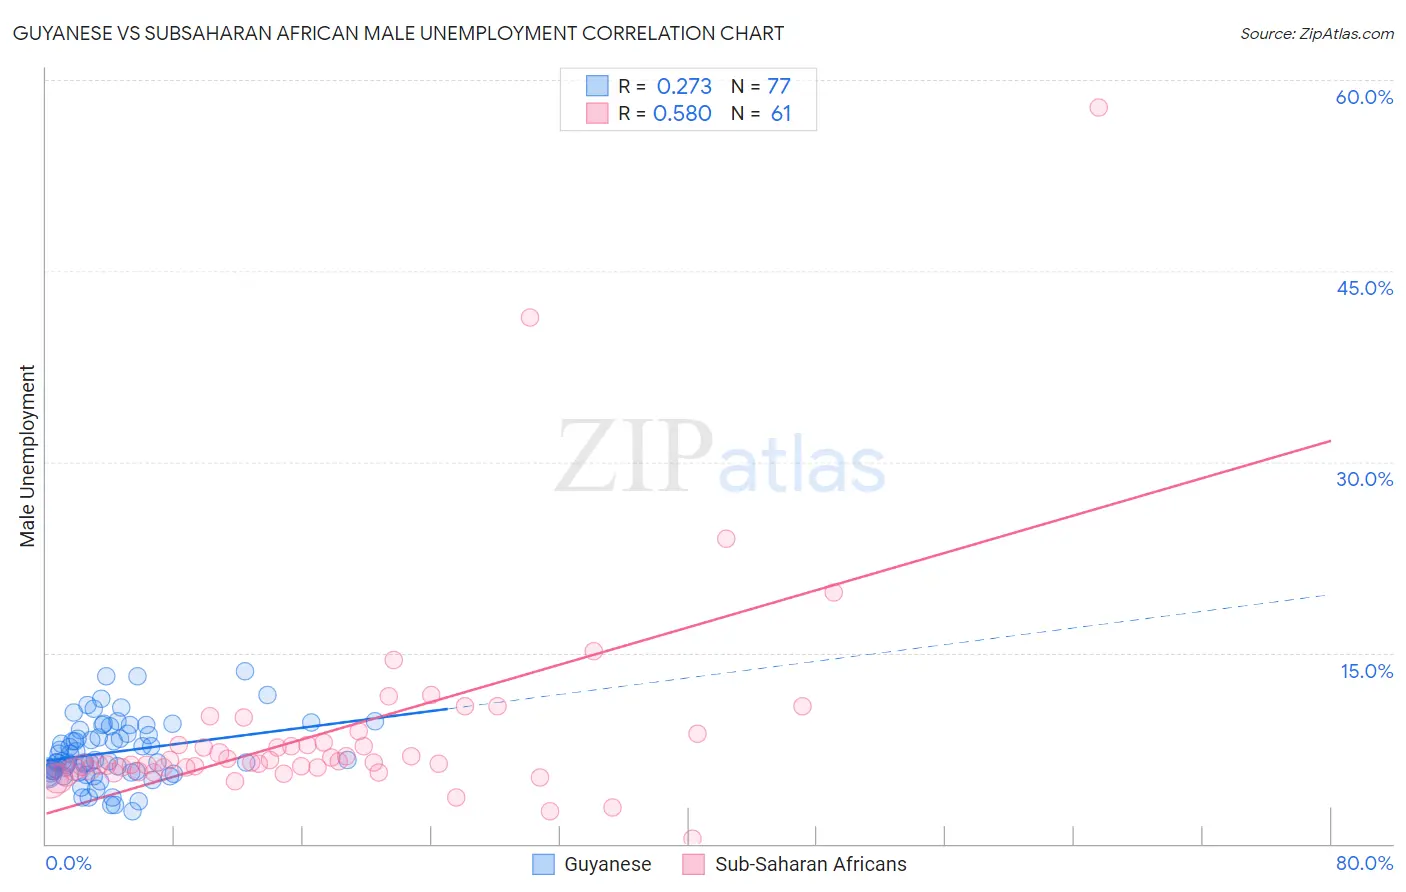 Guyanese vs Subsaharan African Male Unemployment